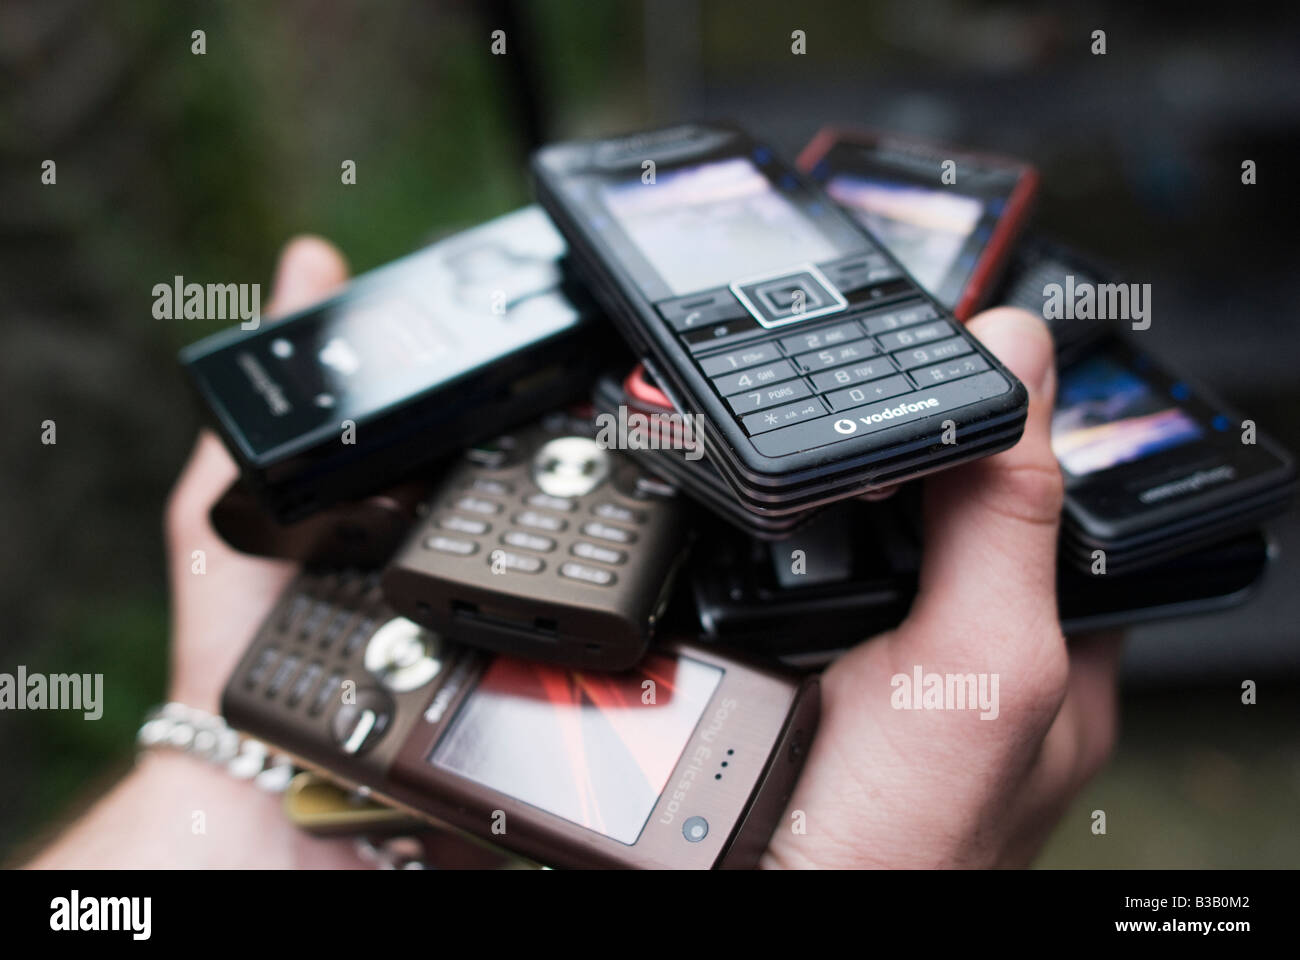 Hands holding a pile of mobile phones Stock Photo